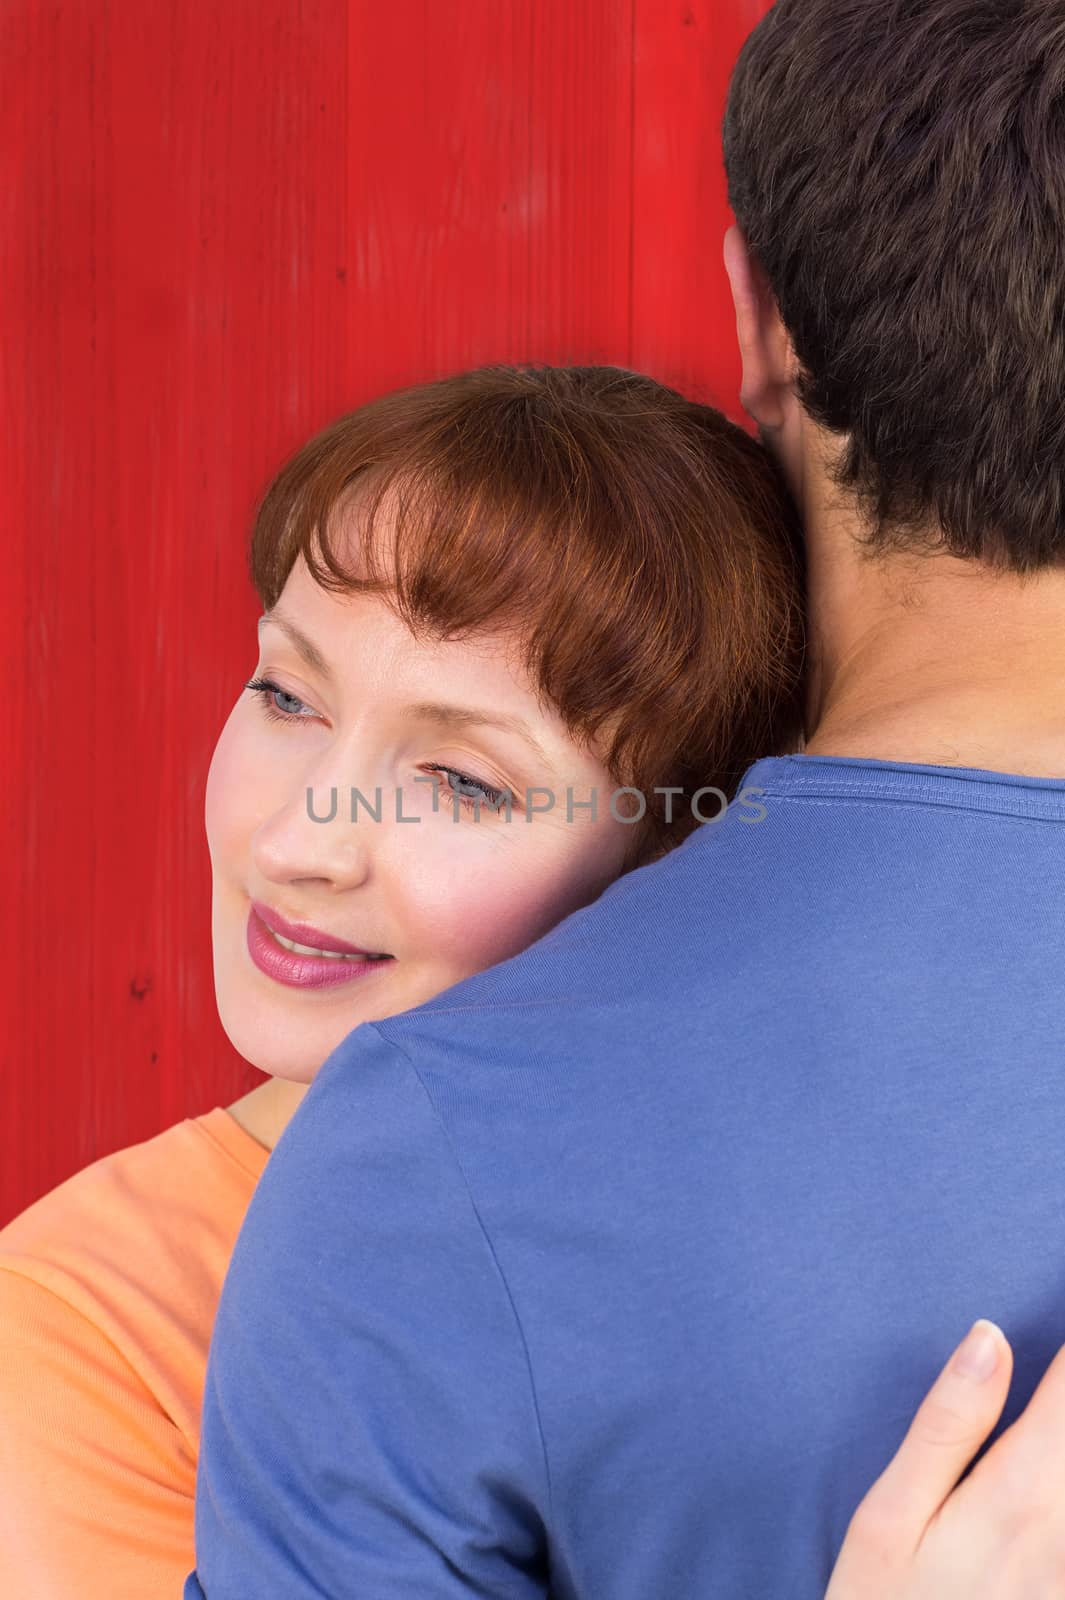 Happy couple hugging one another against red wooden planks